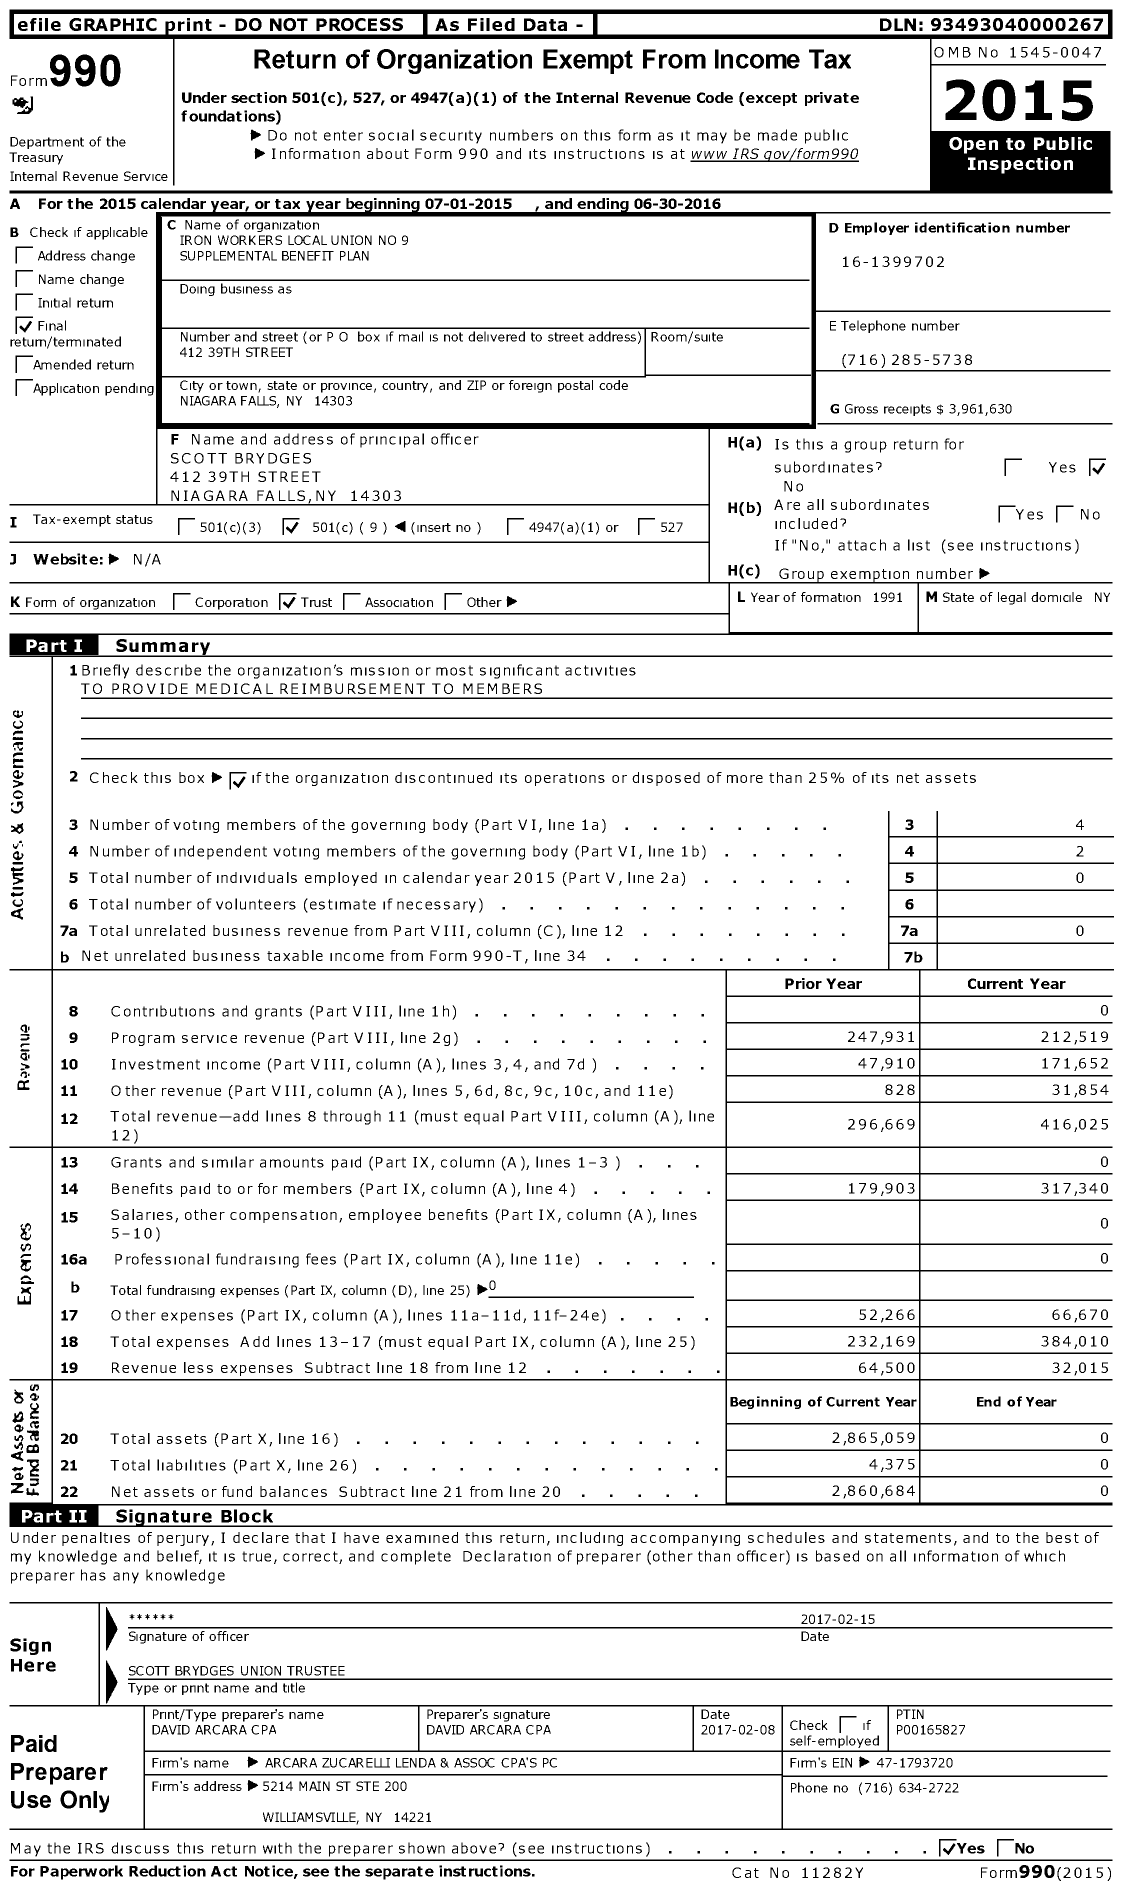 Image of first page of 2015 Form 990O for Iron Workers Local Union No 9 Supplemental Benefit Plan